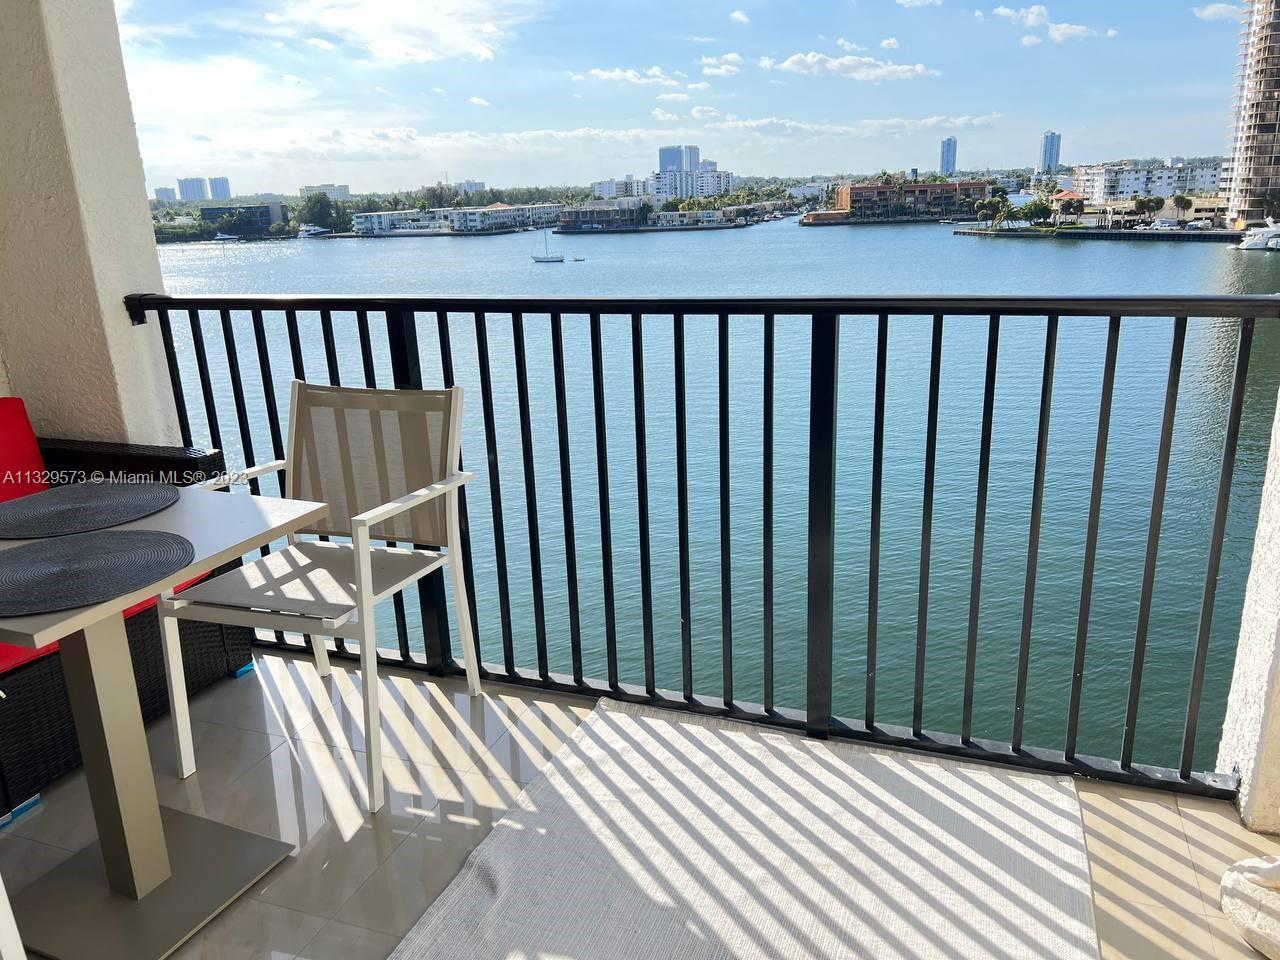 Fully classic renovatated 2 bedrooms 2 baths condo apartment with Bay views on 7th floor. The apartm